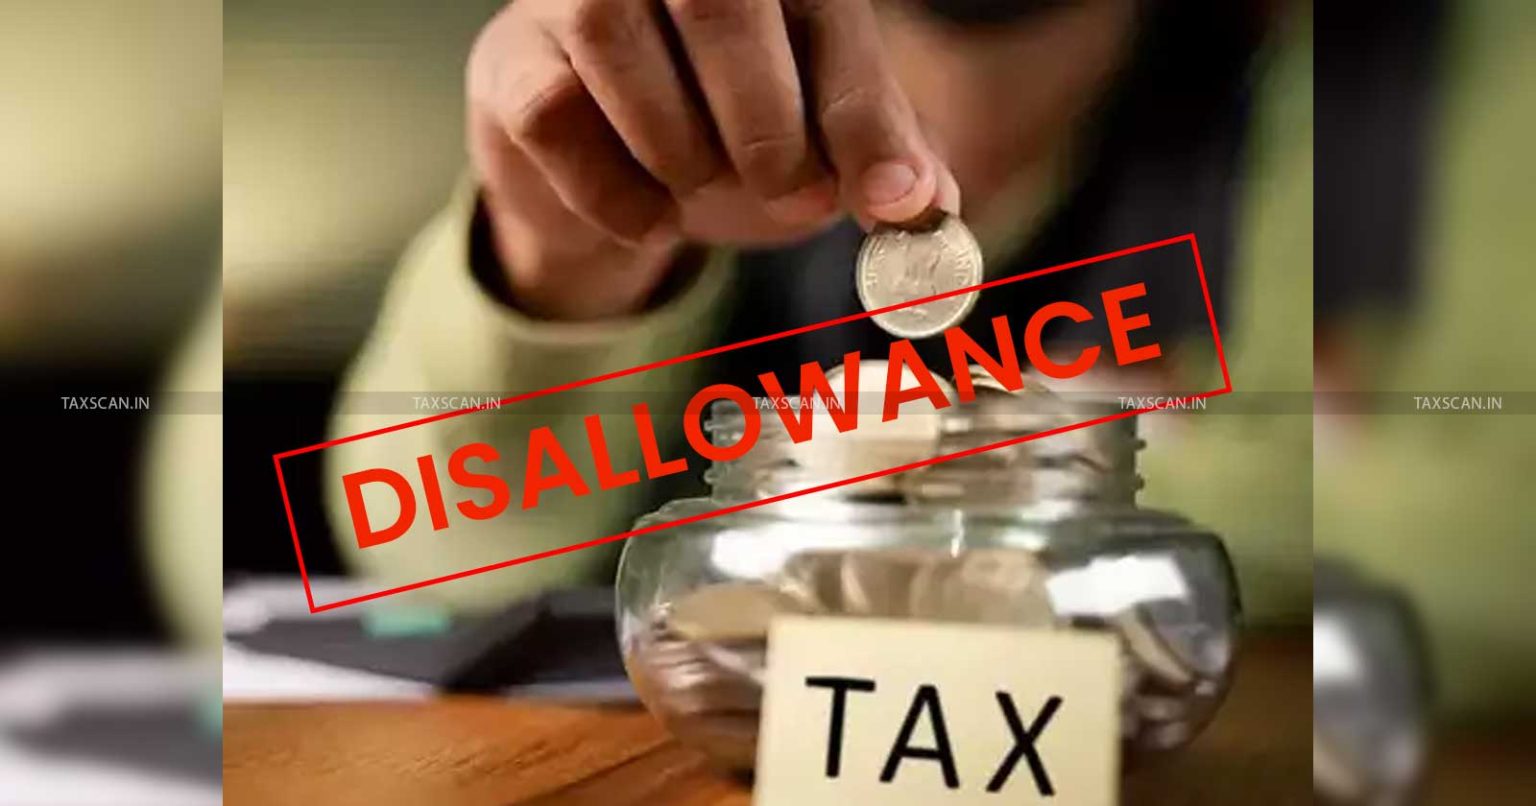 Disallowance - Income Tax - Income Tax Rules - Credit Balance - Investment - weightage - ITAT - re-adjudication - income - tax - taxscan